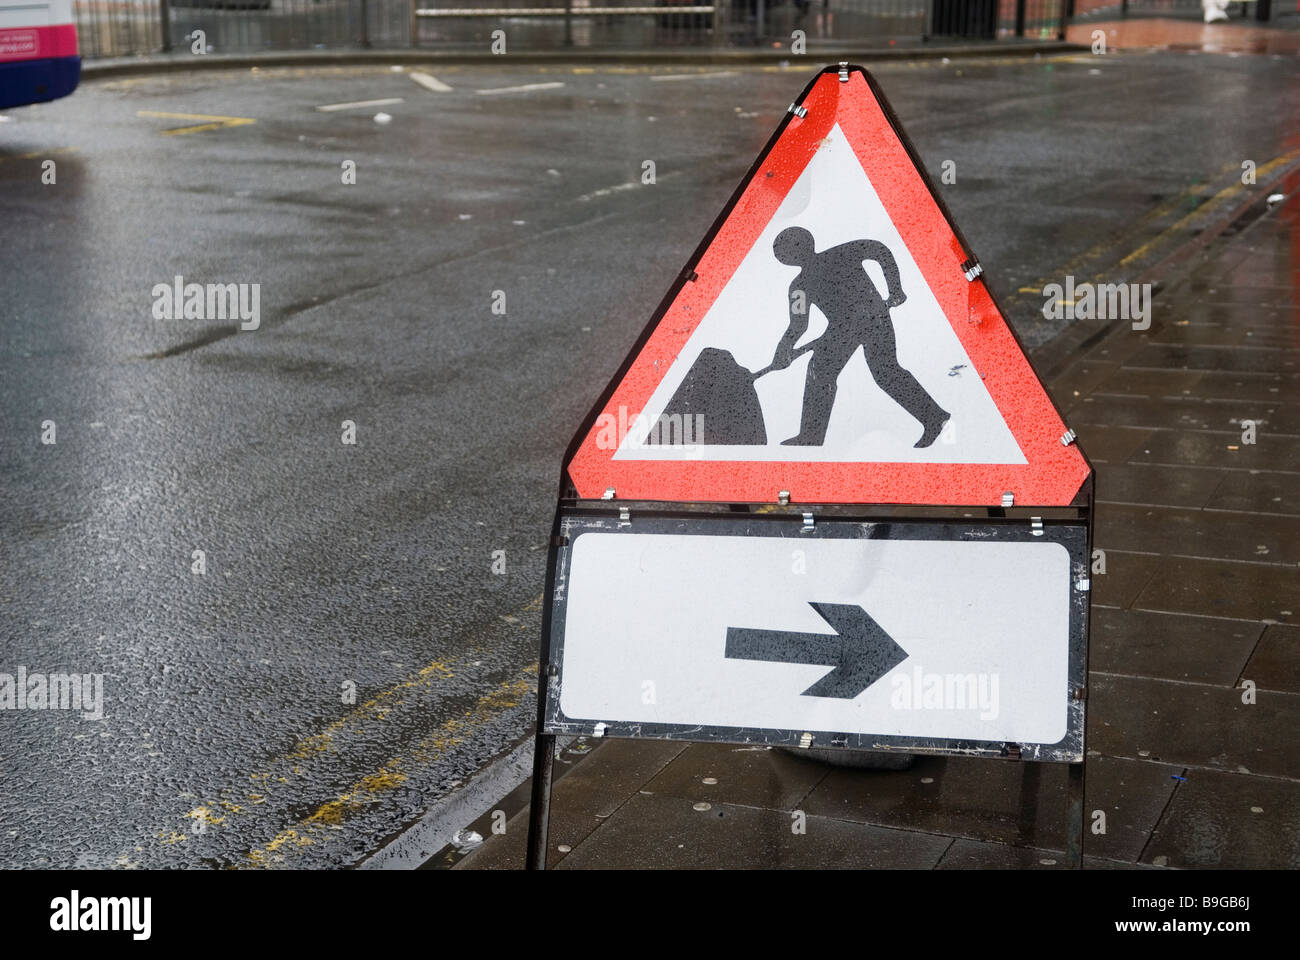 Road works construction sign in Manchester city centre UK Stock Photo